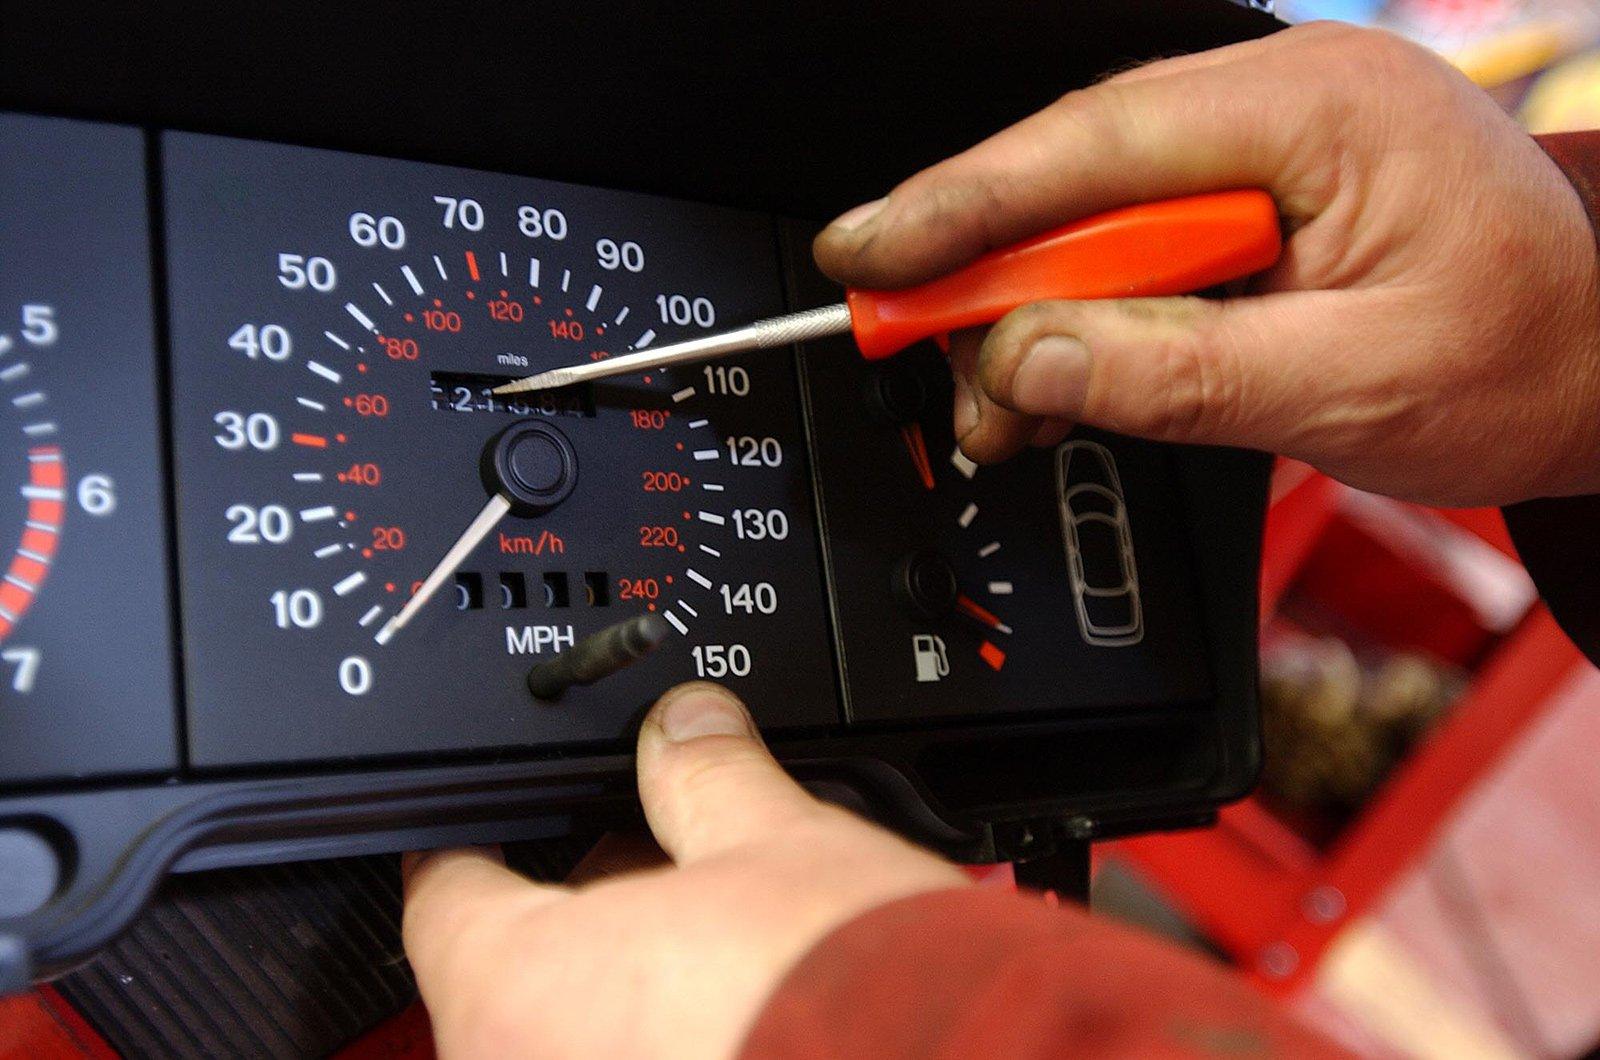 how to reset car odometer